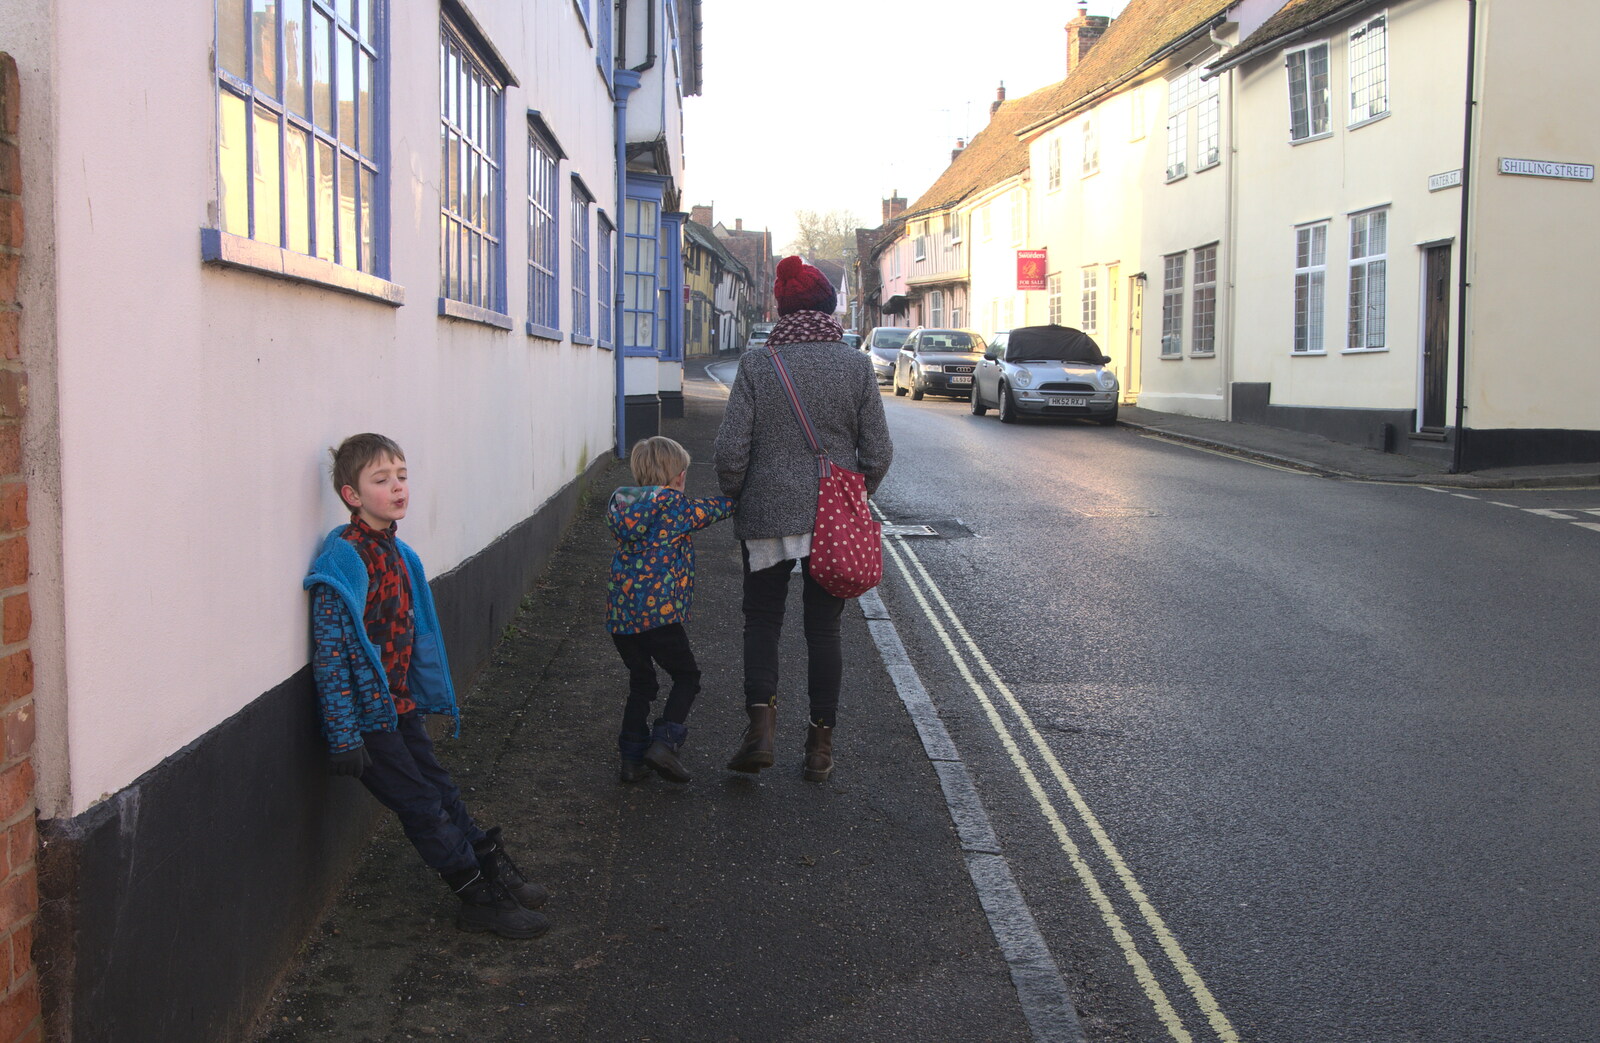 Fred looks a bit 'meh' from A Day in Lavenham, Suffolk - 22nd January 2017